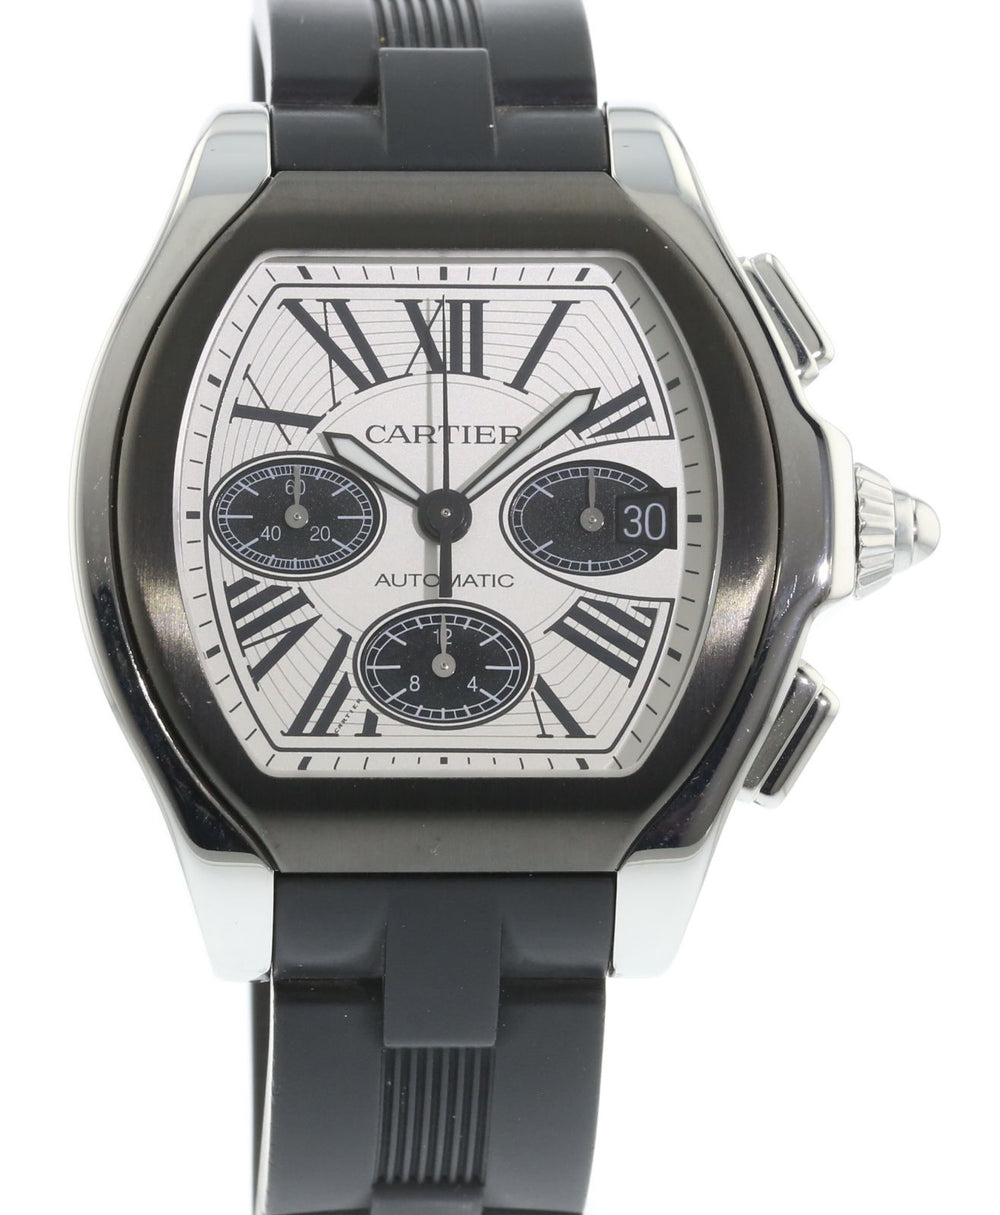 Cartier Roadster Chronograph W6206020/3405 1